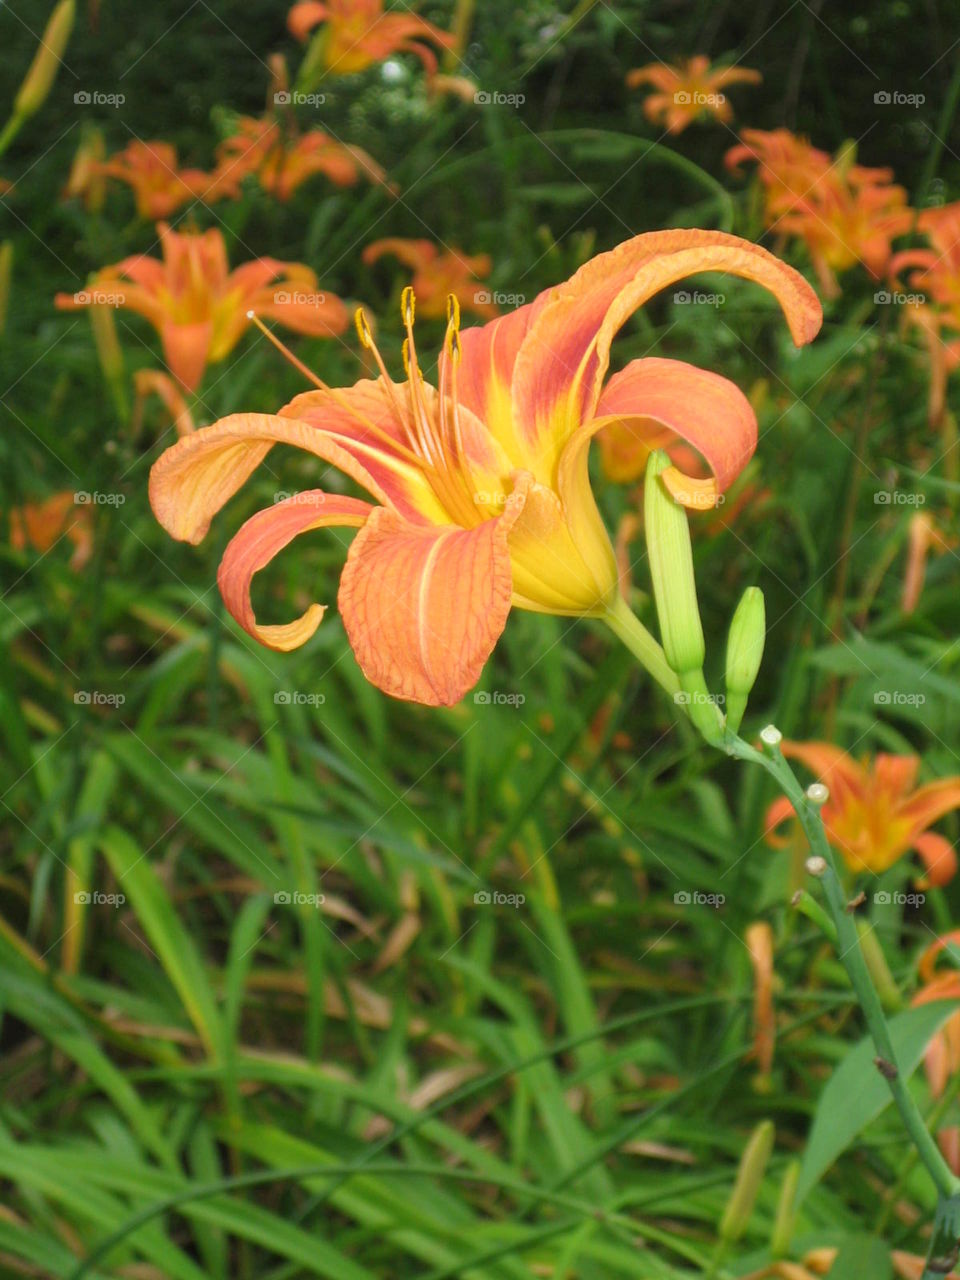 Day Lilies, Tiger Lily. This photo is from a road in Warren County, NJ where millions of day lilies bloom and line the sides of the road.